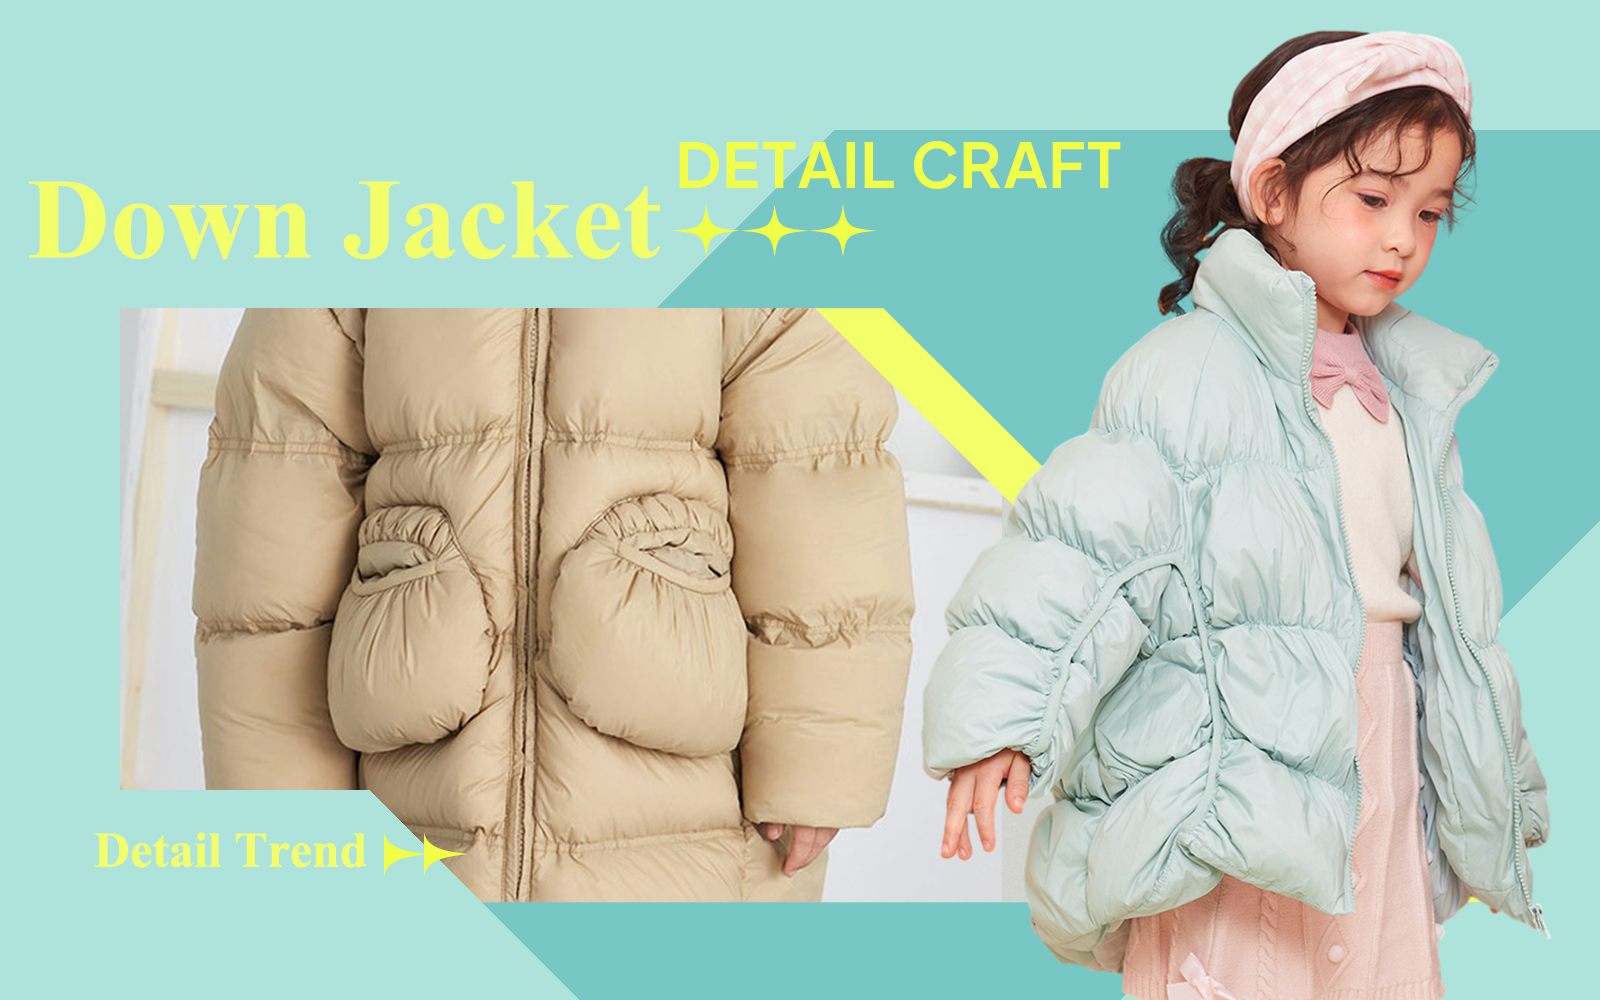 Down Jacket -- The Detail & Craft Trend for Kidswear